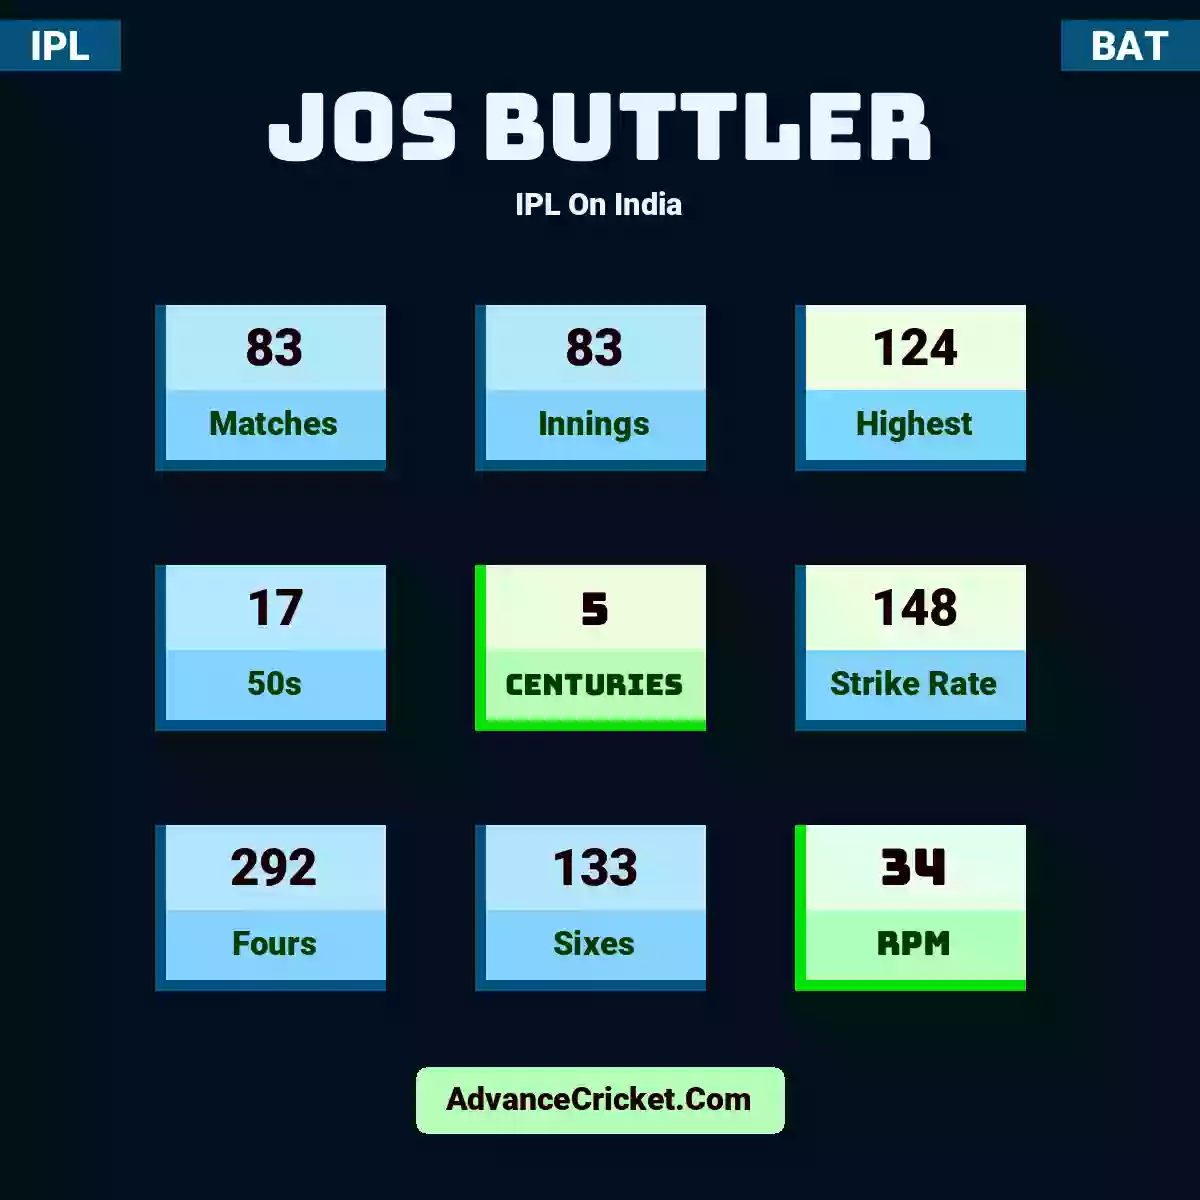 Jos Buttler IPL  On India, Jos Buttler played 83 matches, scored 124 runs as highest, 17 half-centuries, and 5 centuries, with a strike rate of 148. J.Buttler hit 292 fours and 133 sixes, with an RPM of 34.